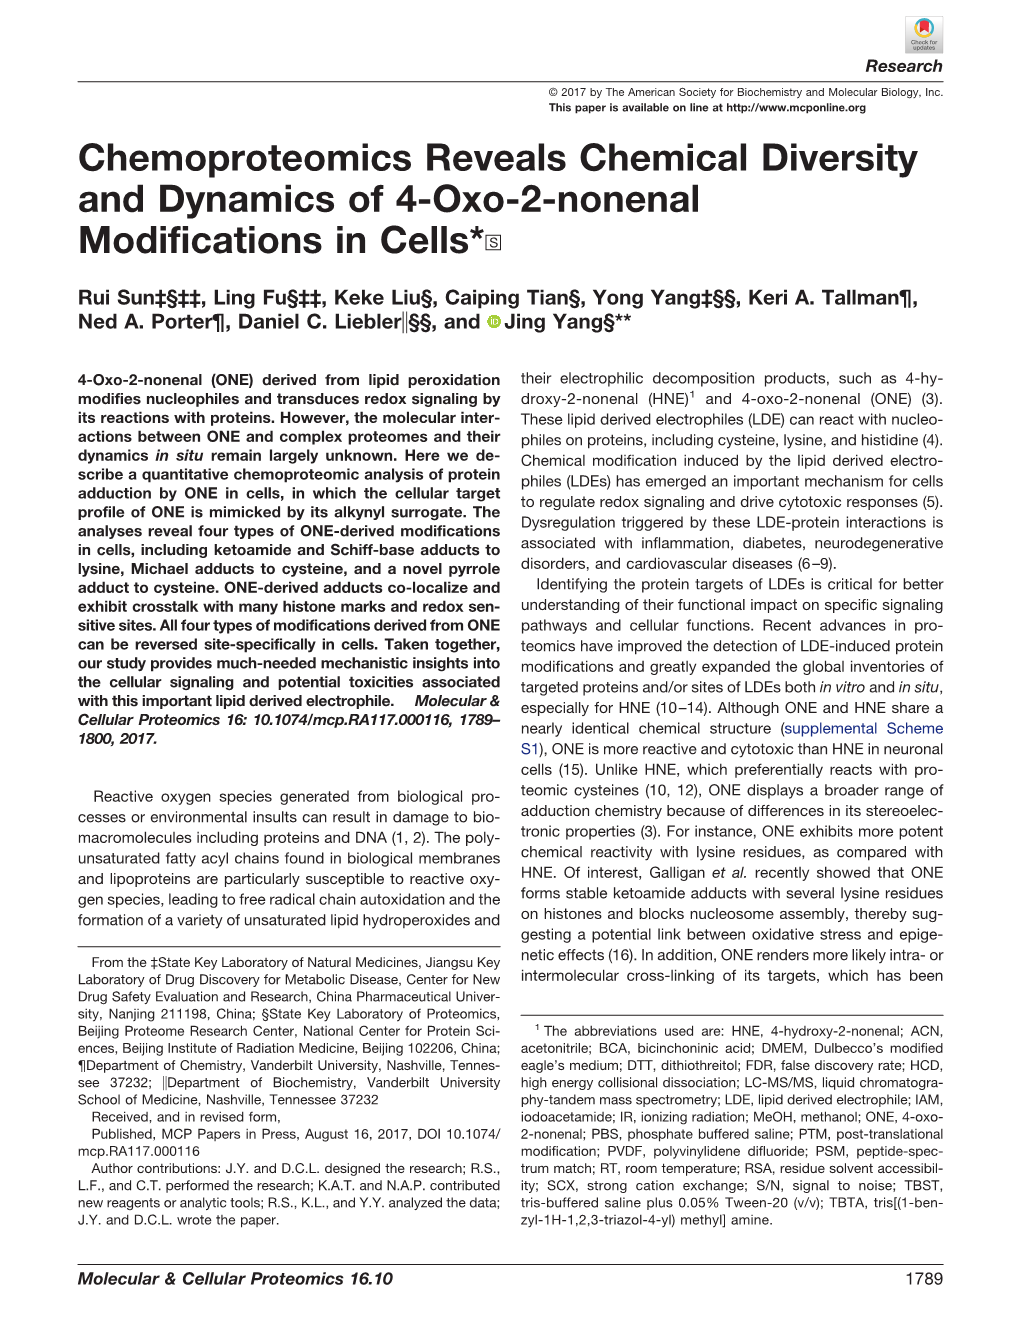 Chemoproteomics Reveals Chemical Diversity and Dynamics of 4-Oxo-2-Nonenal Modifications in Cells*